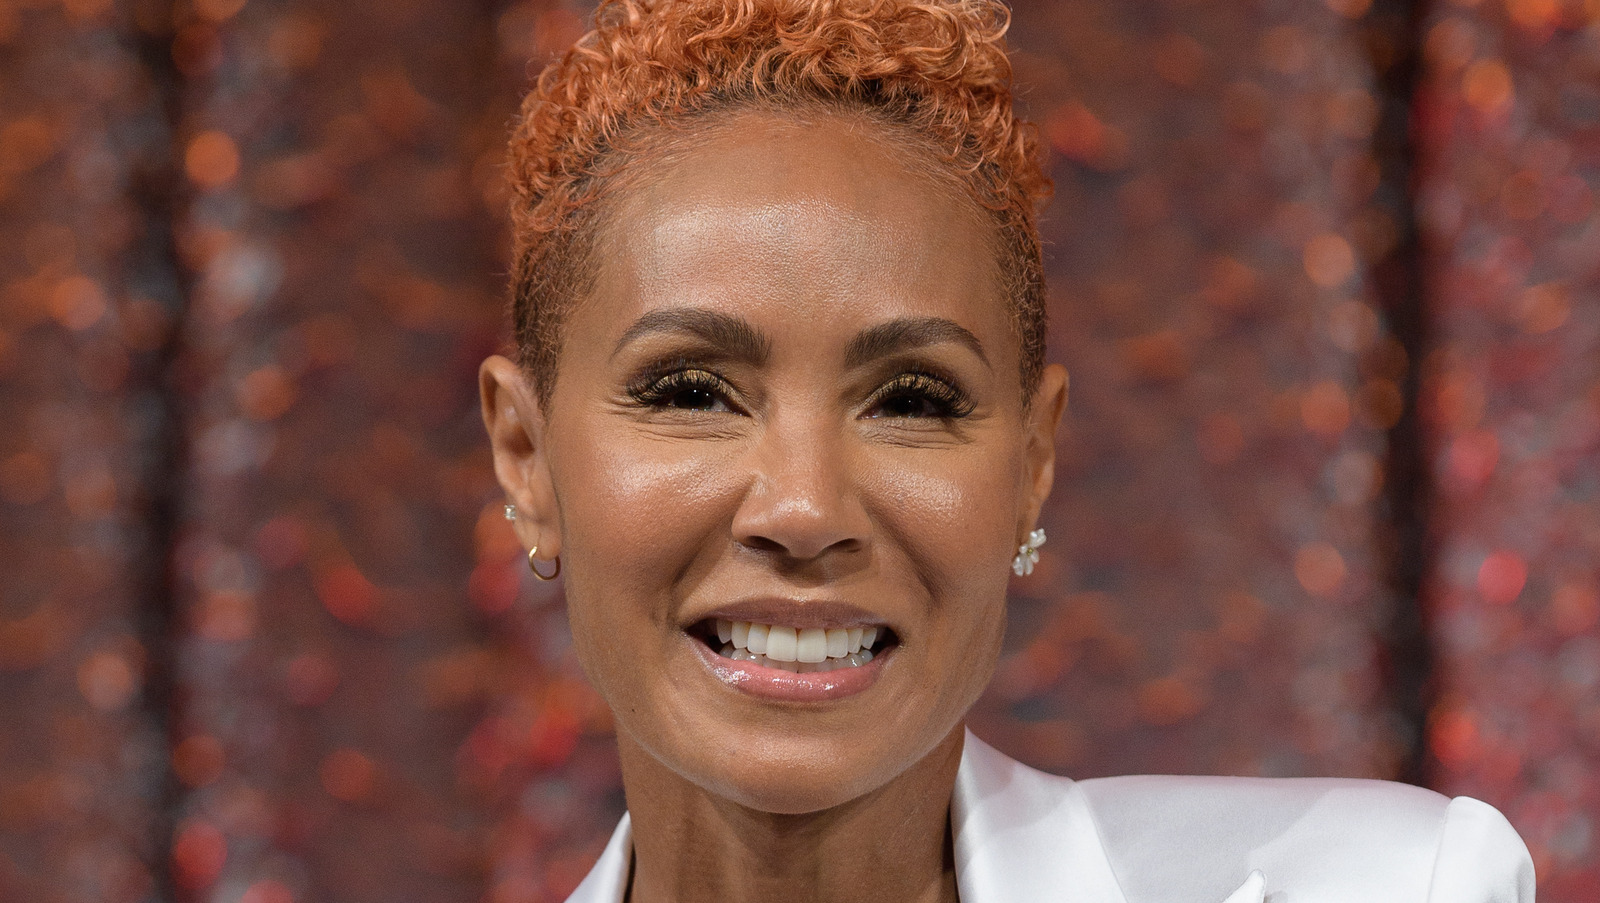 Jada Pinkett Smith Just Made A Surprising Announcement About Her Sexuality